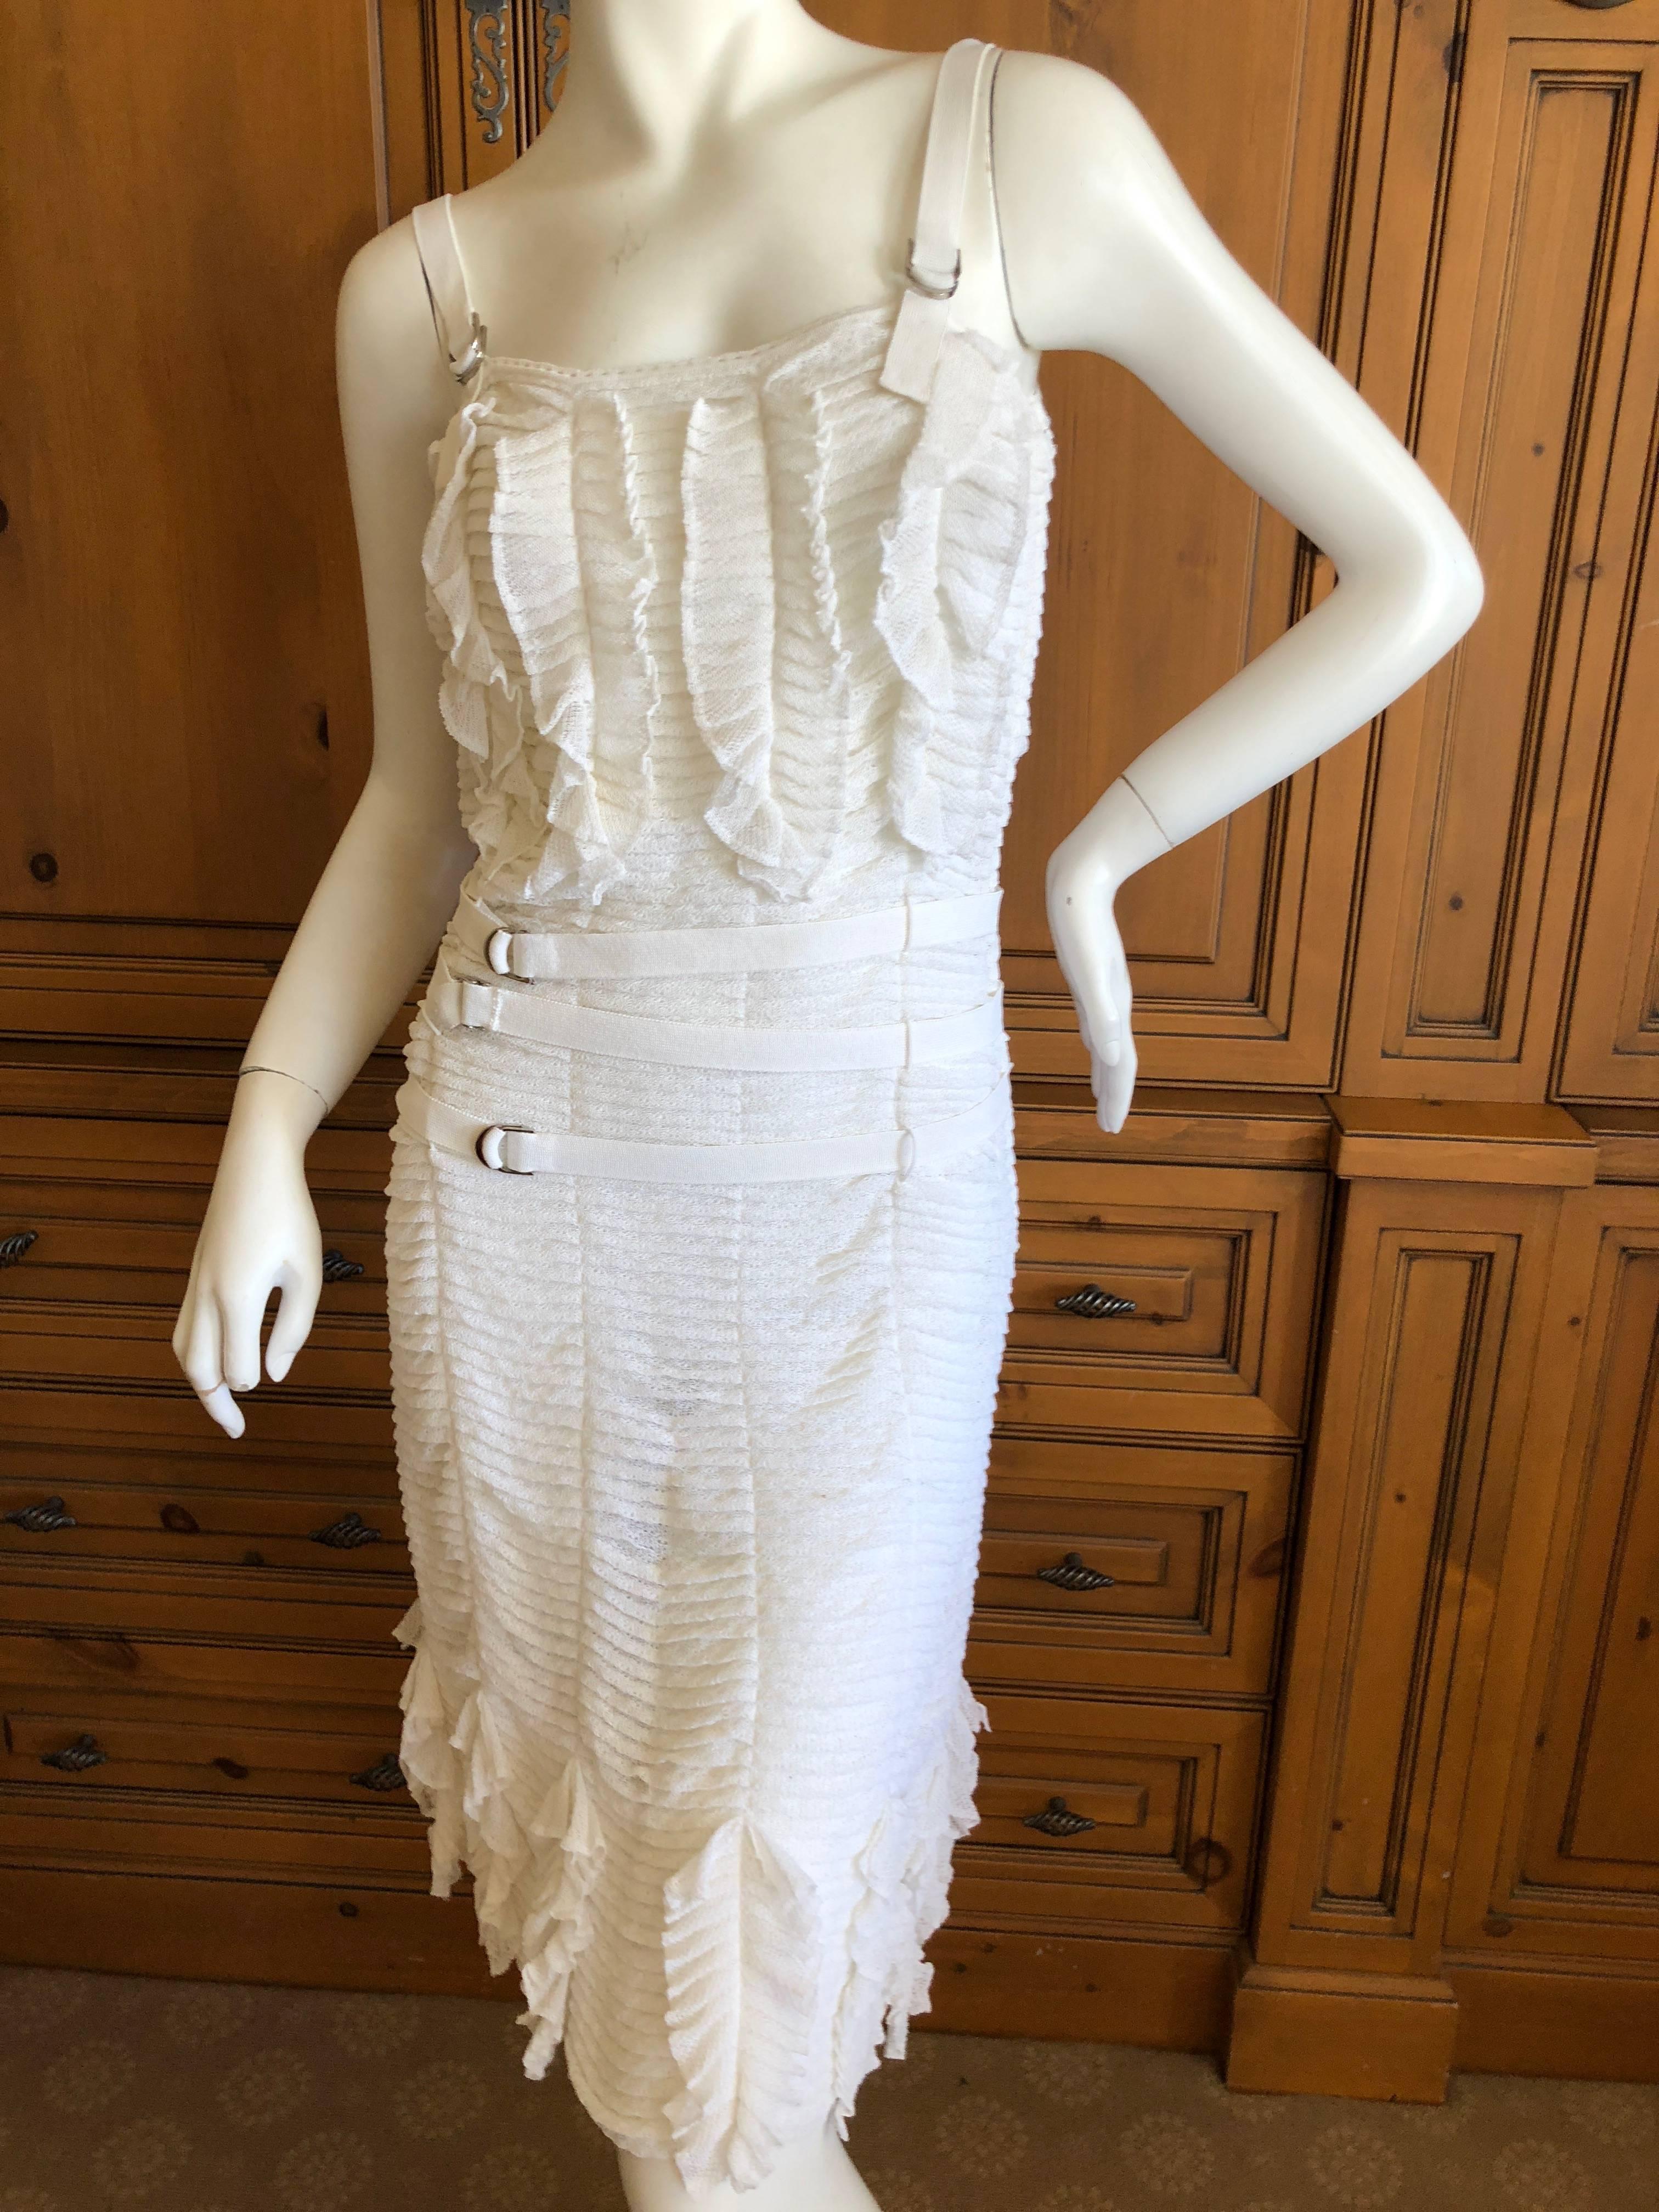 Christian Dior by John Galliano Gauzy White Ribbon Dress .
This is so pretty, with lacy gauze like fabric, much prettier in person.

Size 42
Bust 36